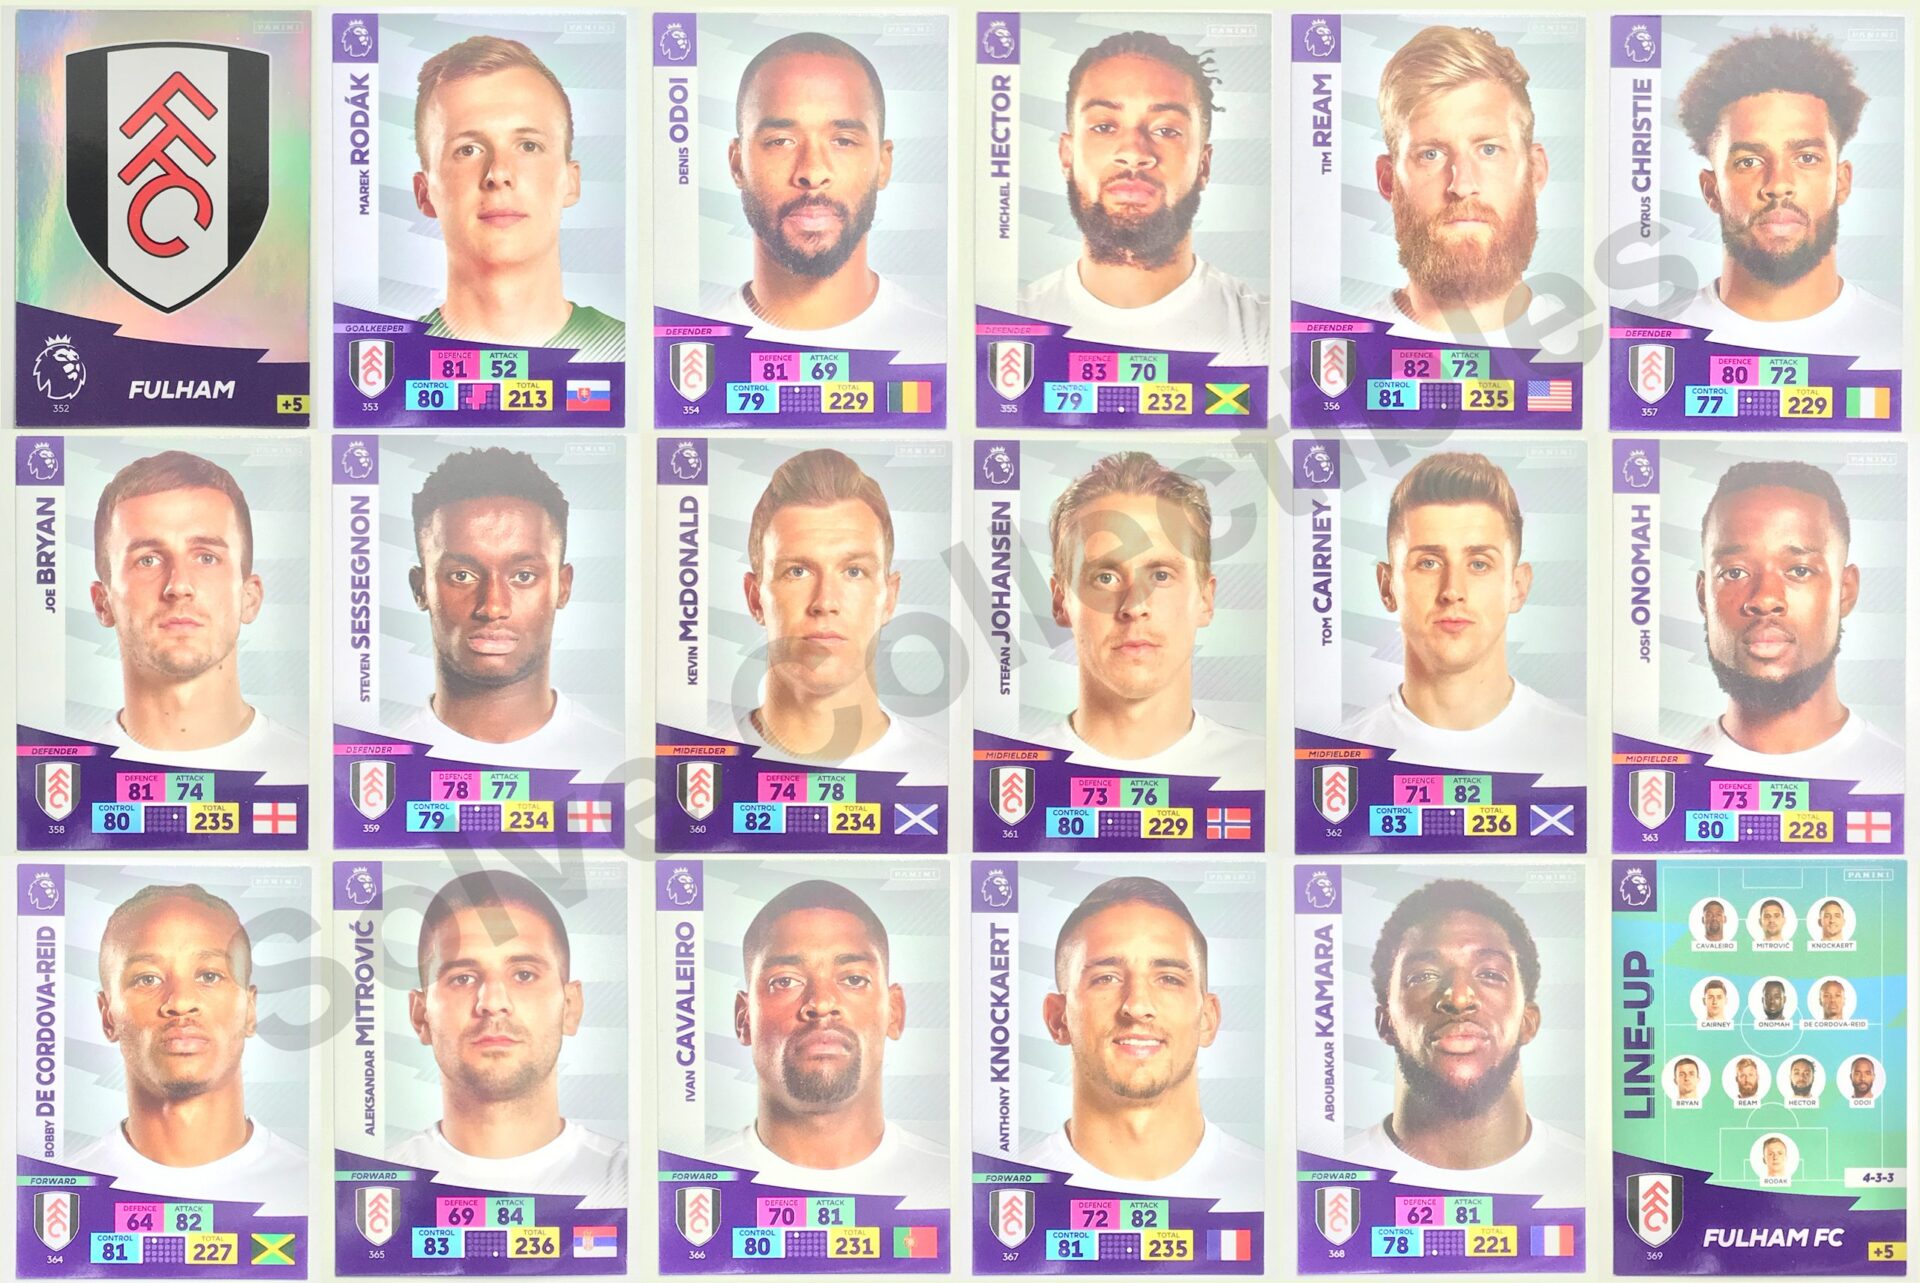 PANINI ADRENALYN XL PREMIER LEAGUE 2020/21 TEAM SET OF ALL 18 FULHAM CARDS 